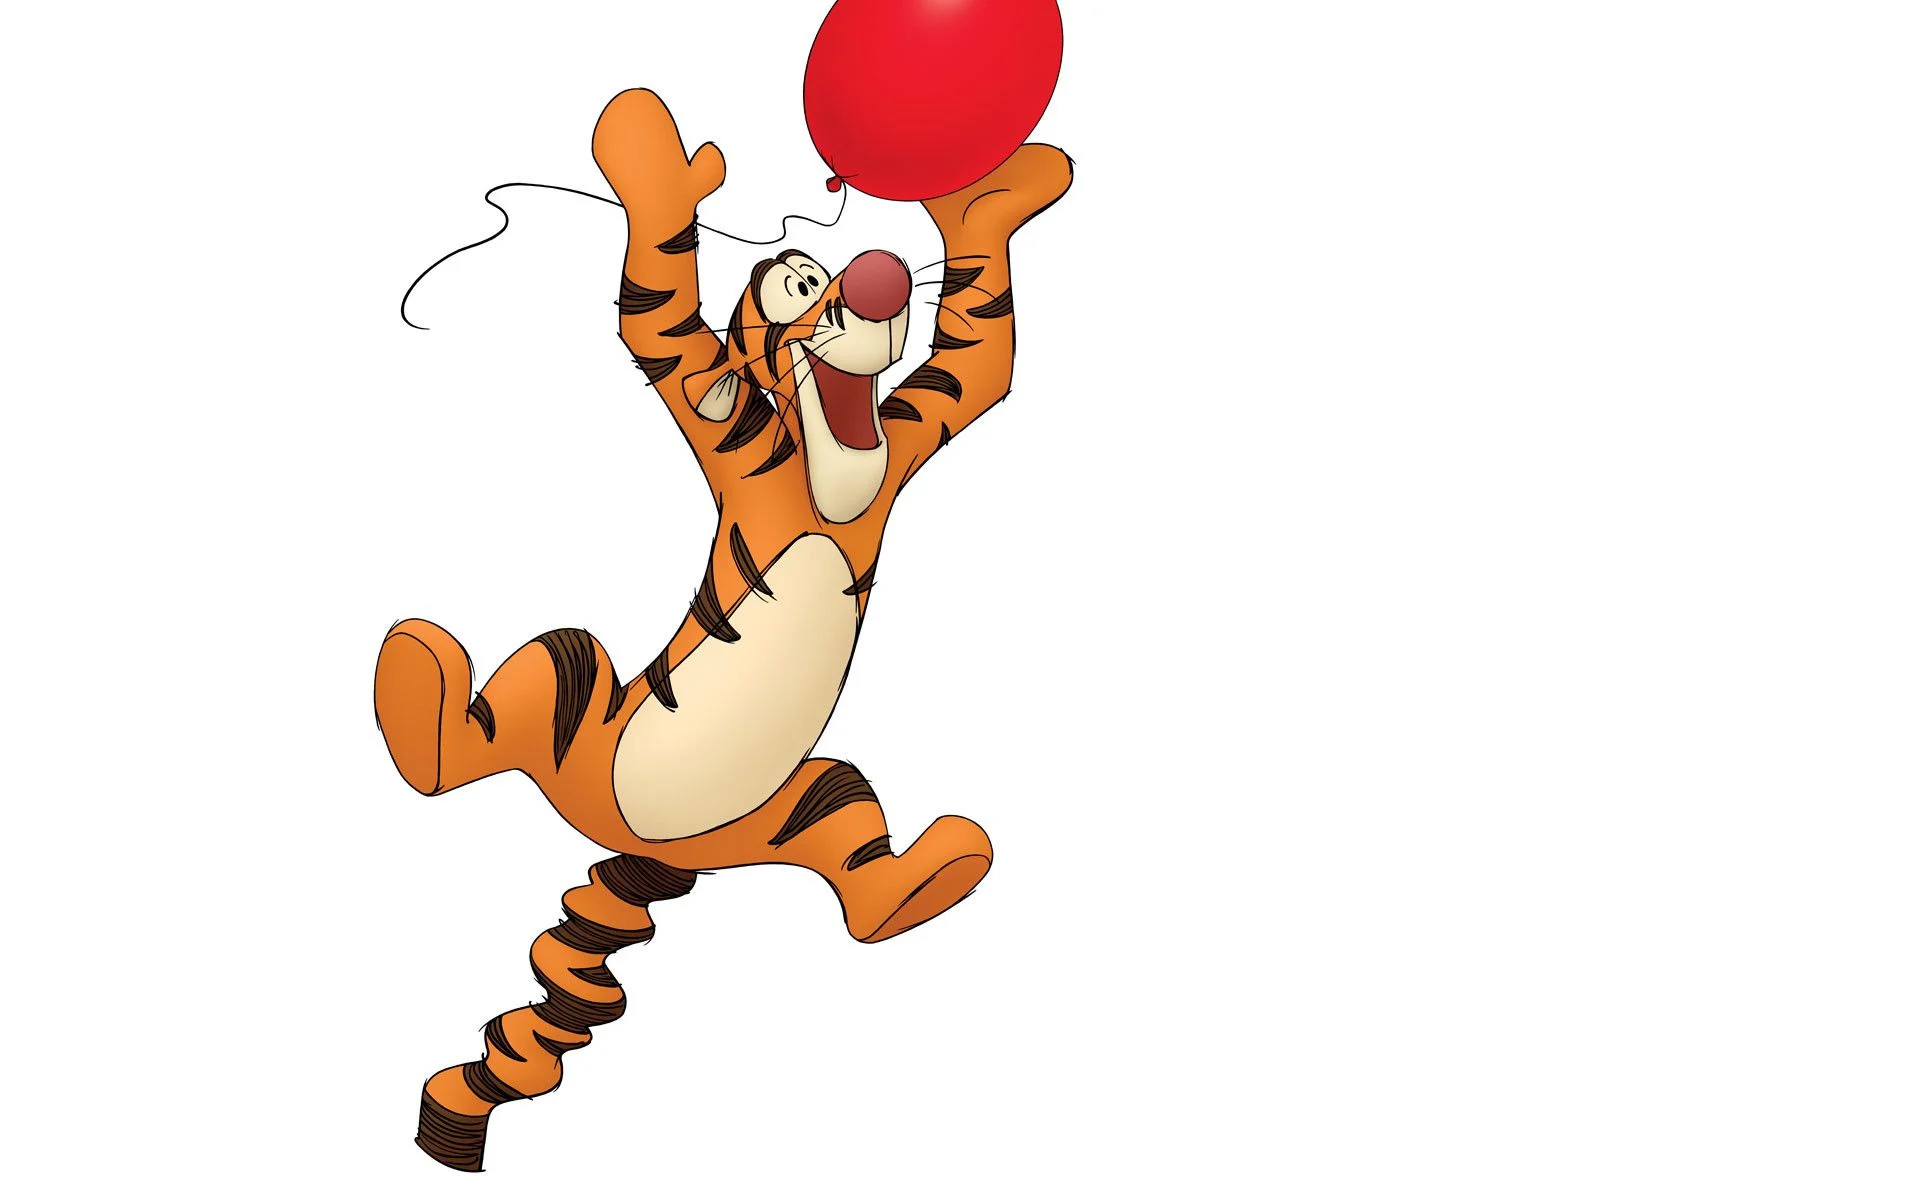 Tigger, Winnie-the-Pooh animation, Tigger Winnie the Pooh wallpapers, Tigger backgrounds, 1920x1200 HD Desktop